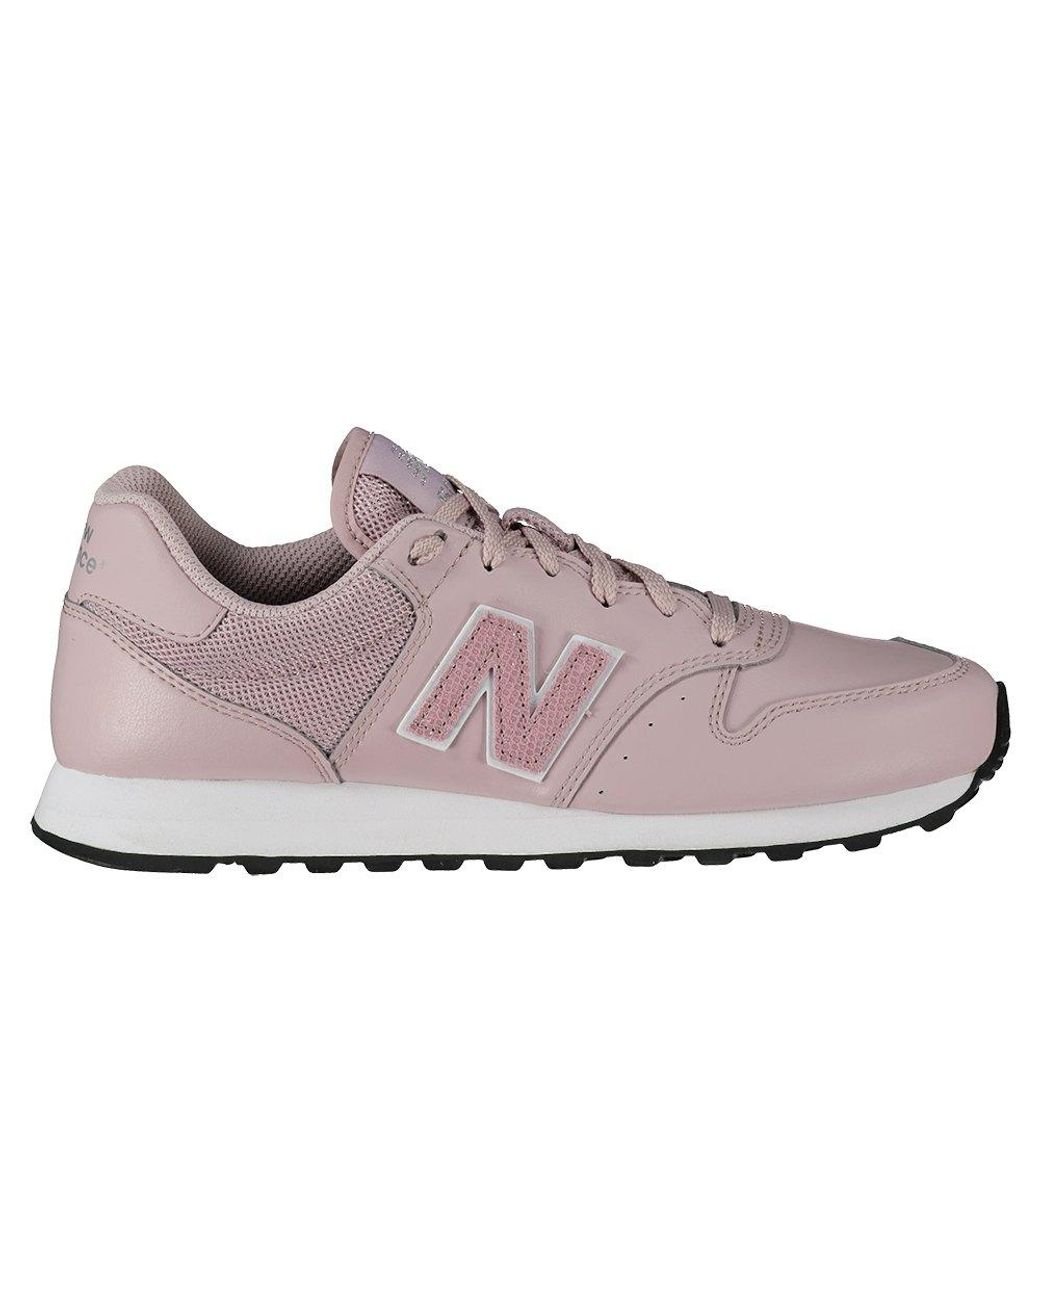 New Balance 500 Trainers in Gray | Lyst